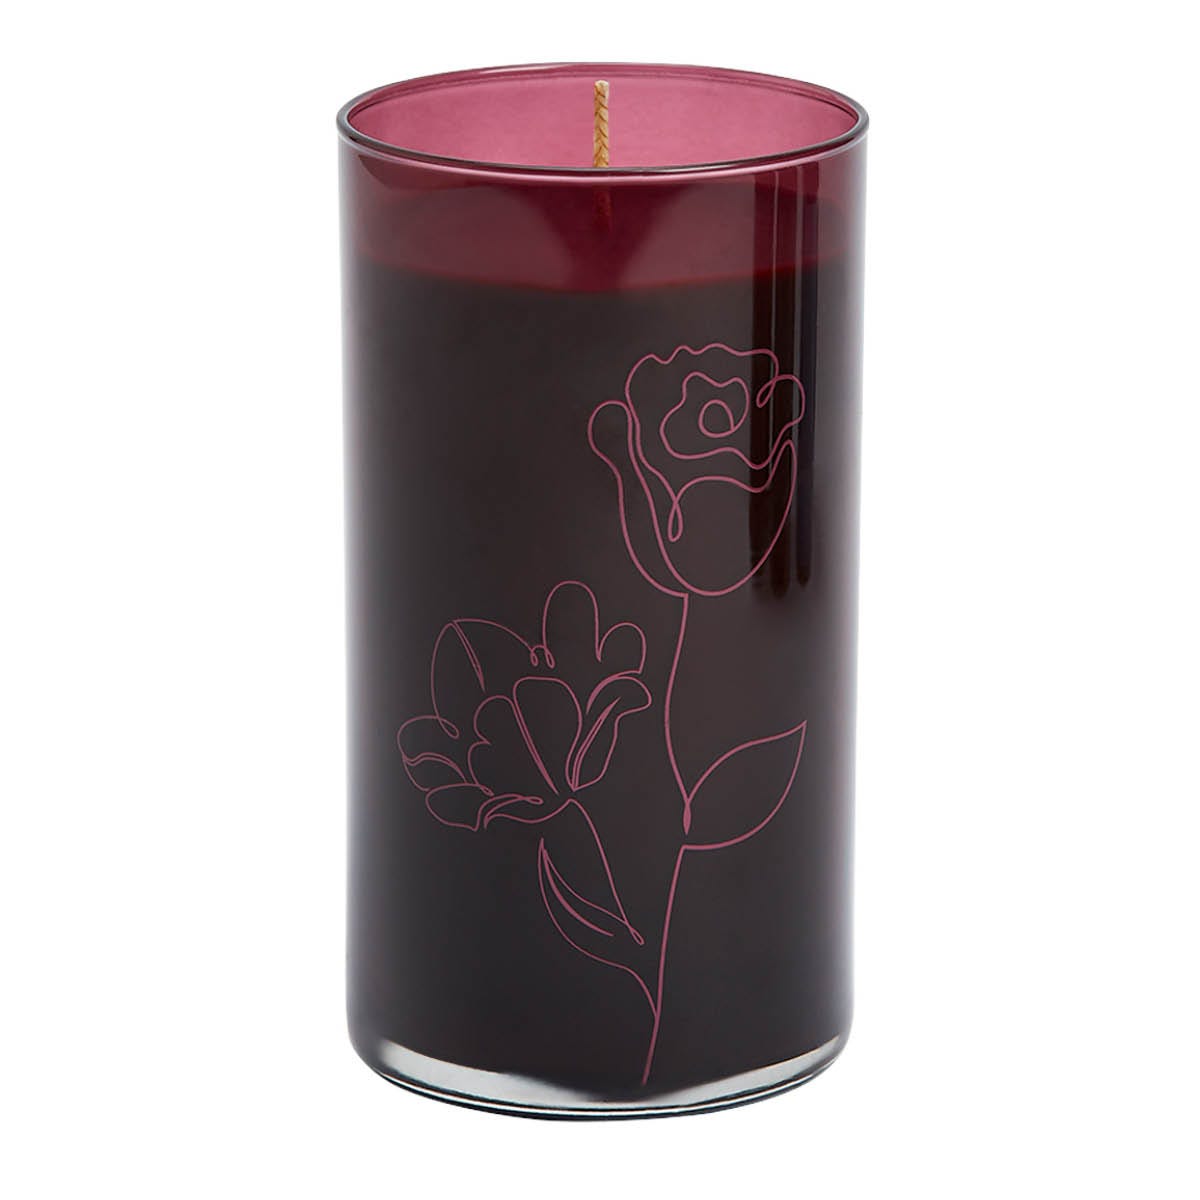 Life is a Cabernet - Dark Plum and Red Berries Scented Jar Candle